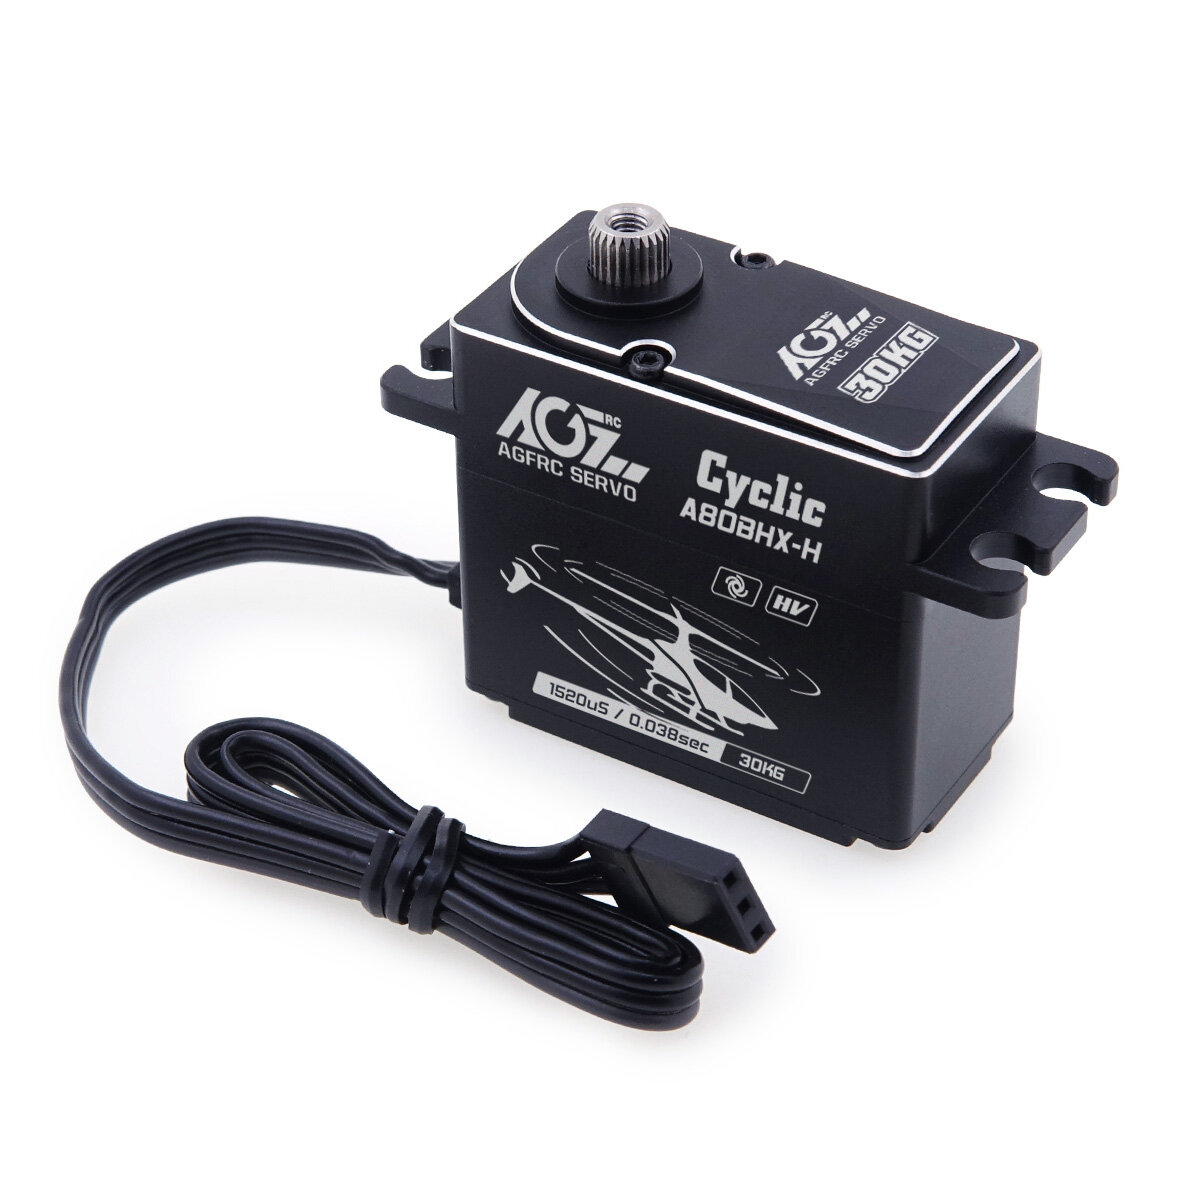 

AGF A80BHX-H 30KG High Torque 0.06sec High Speed High Voltage Swash Plate Brushless Helicopter Cyclic Servo